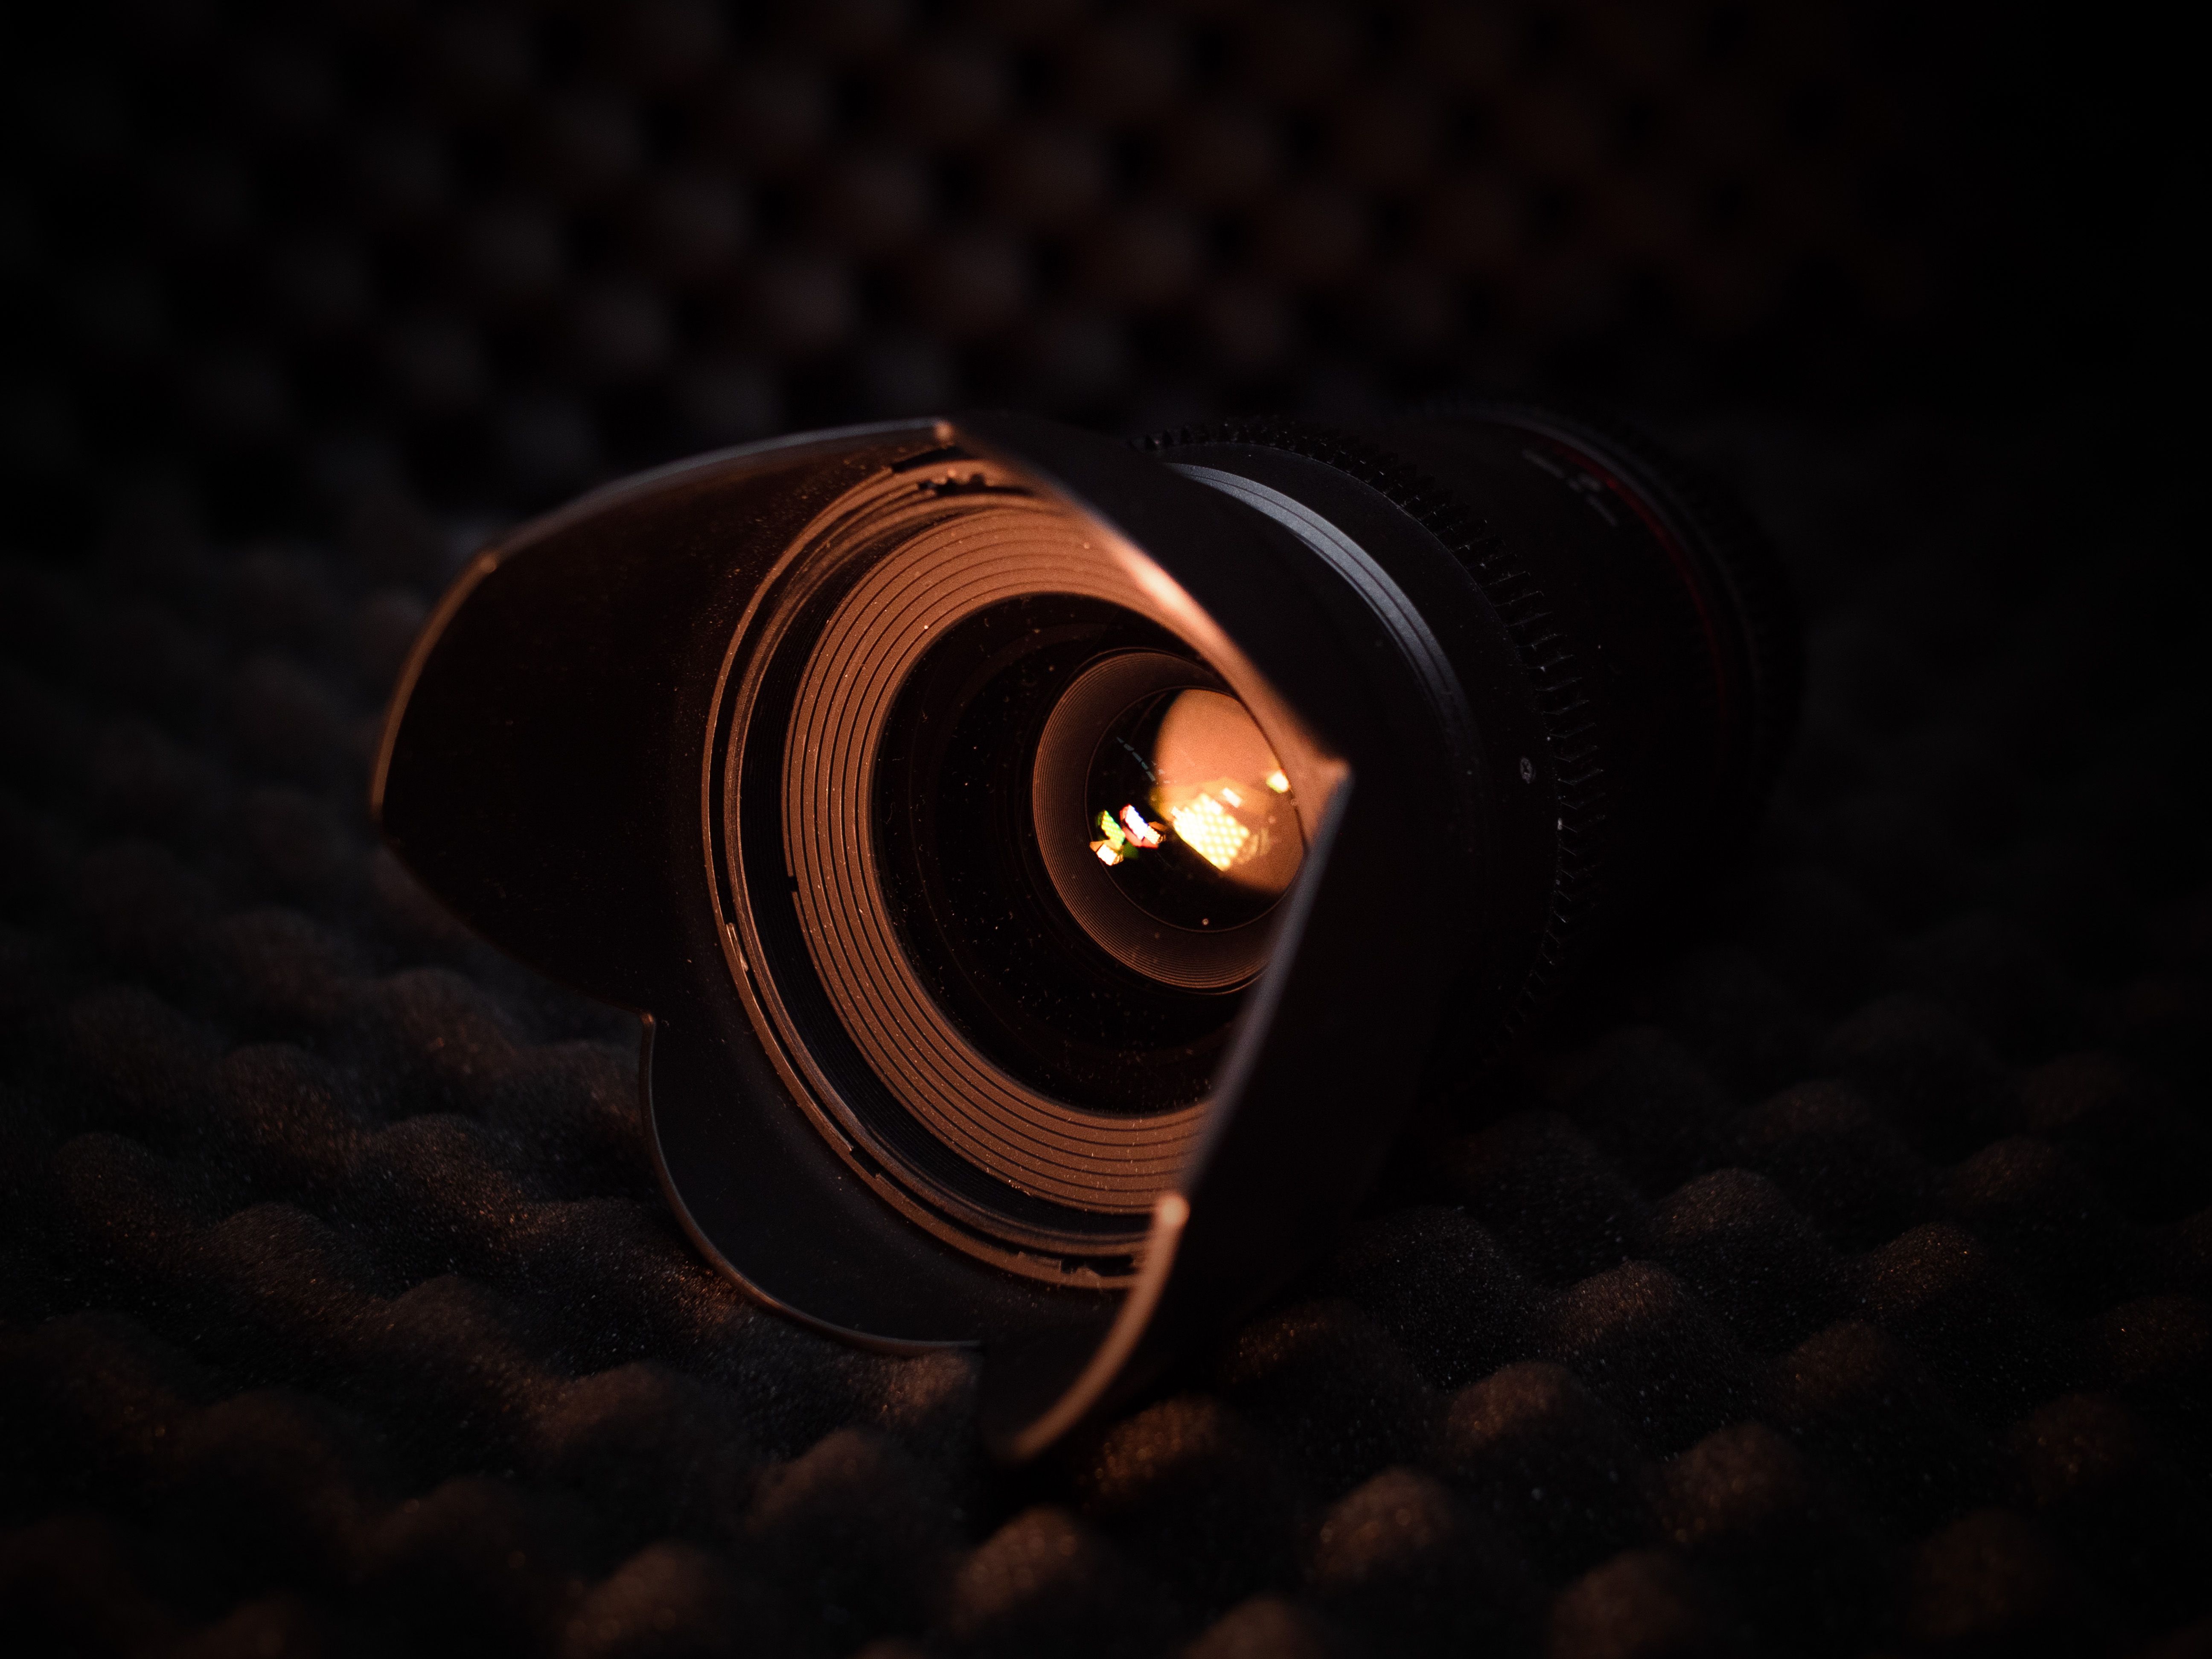 24 mm f.3.1 Walimax Pro Lens